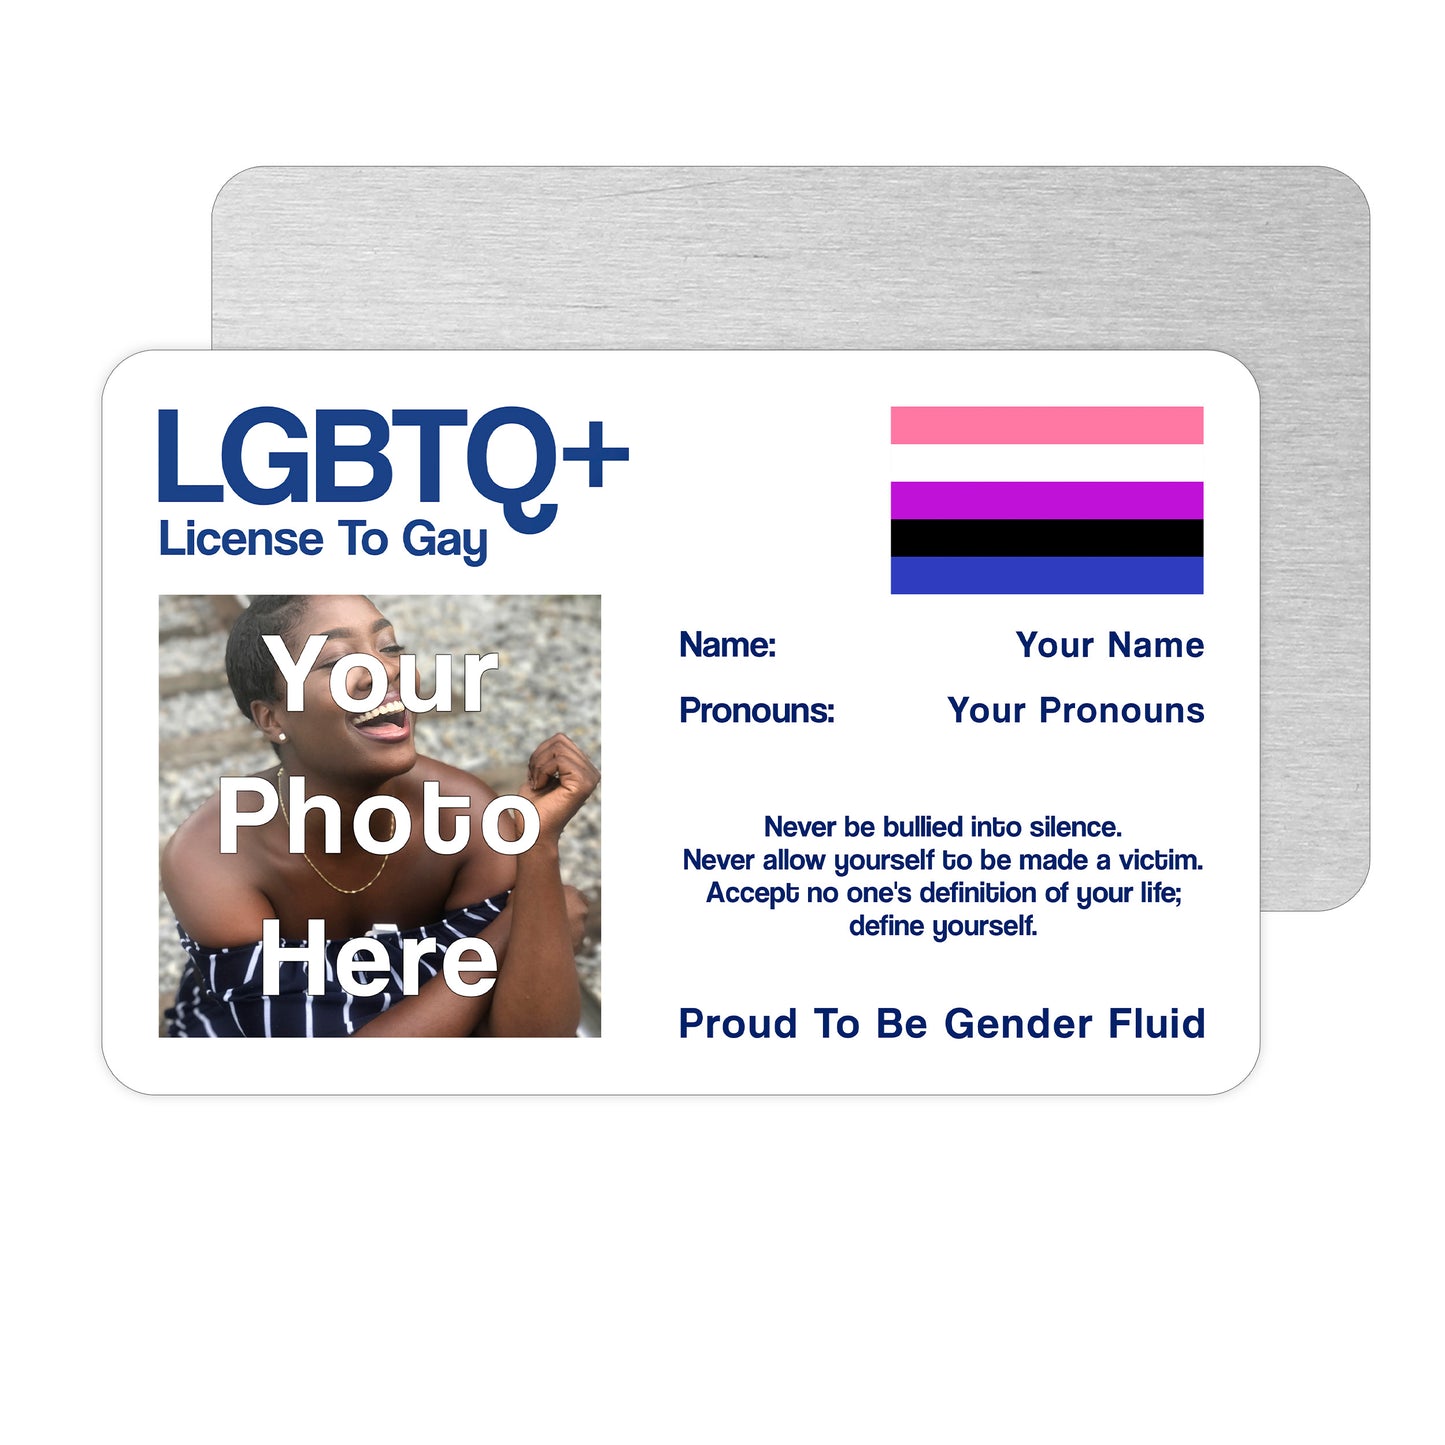 Gender Fluid License To Gay aluminium wallet card personalised with your name, pronouns, and photo